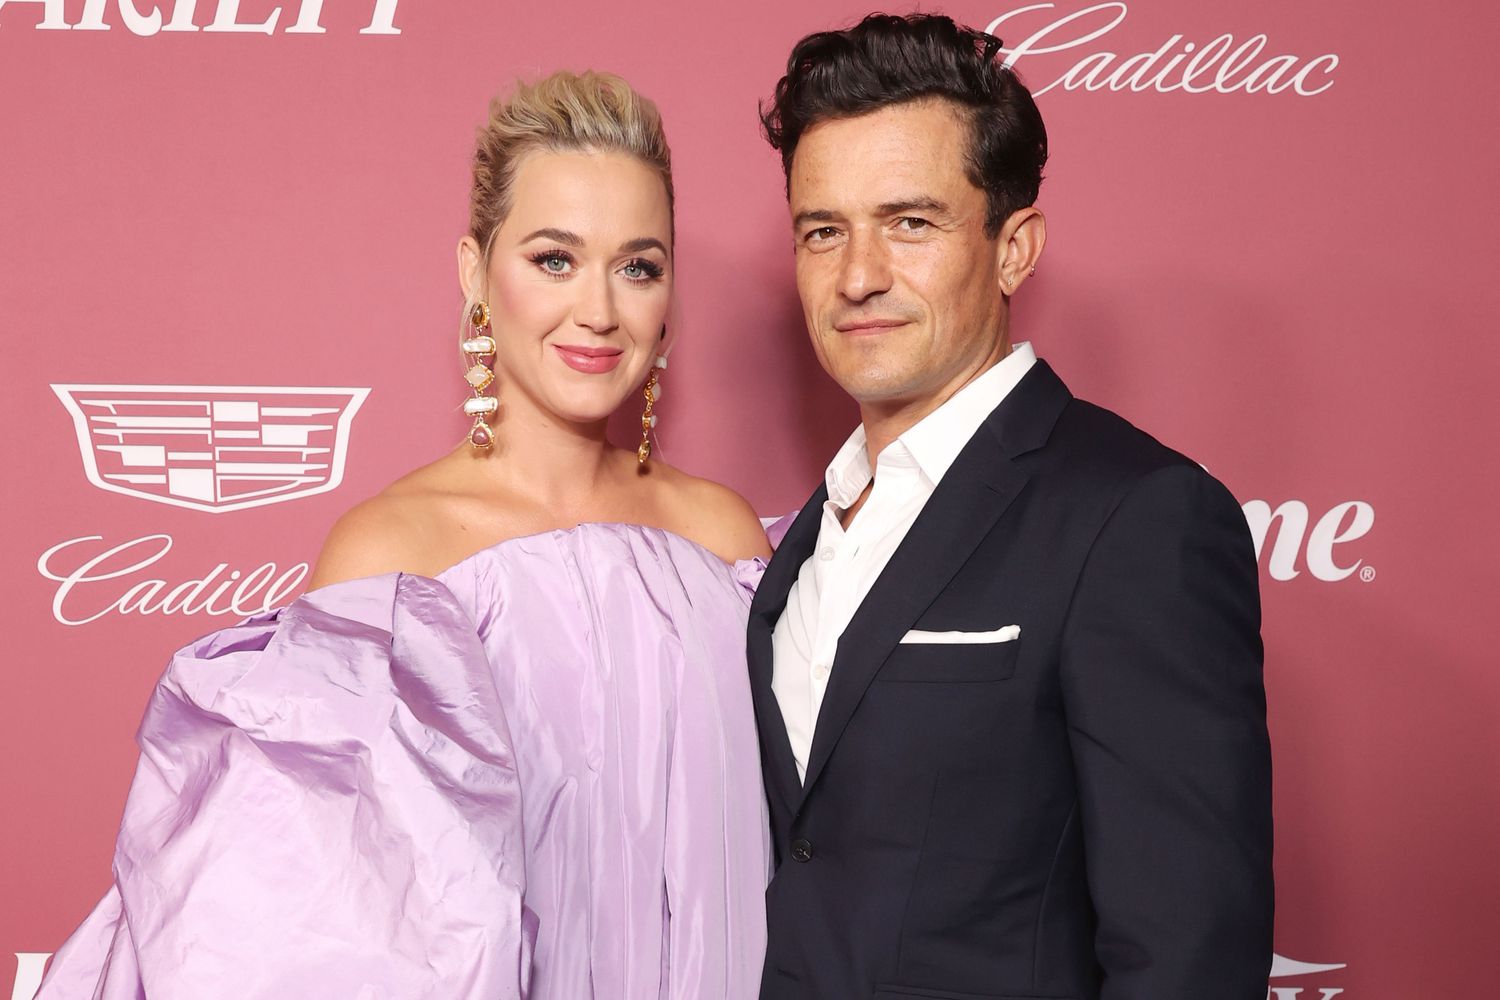 Katy Perry wearing a purple dress and orlando Bloom wearing a black suit